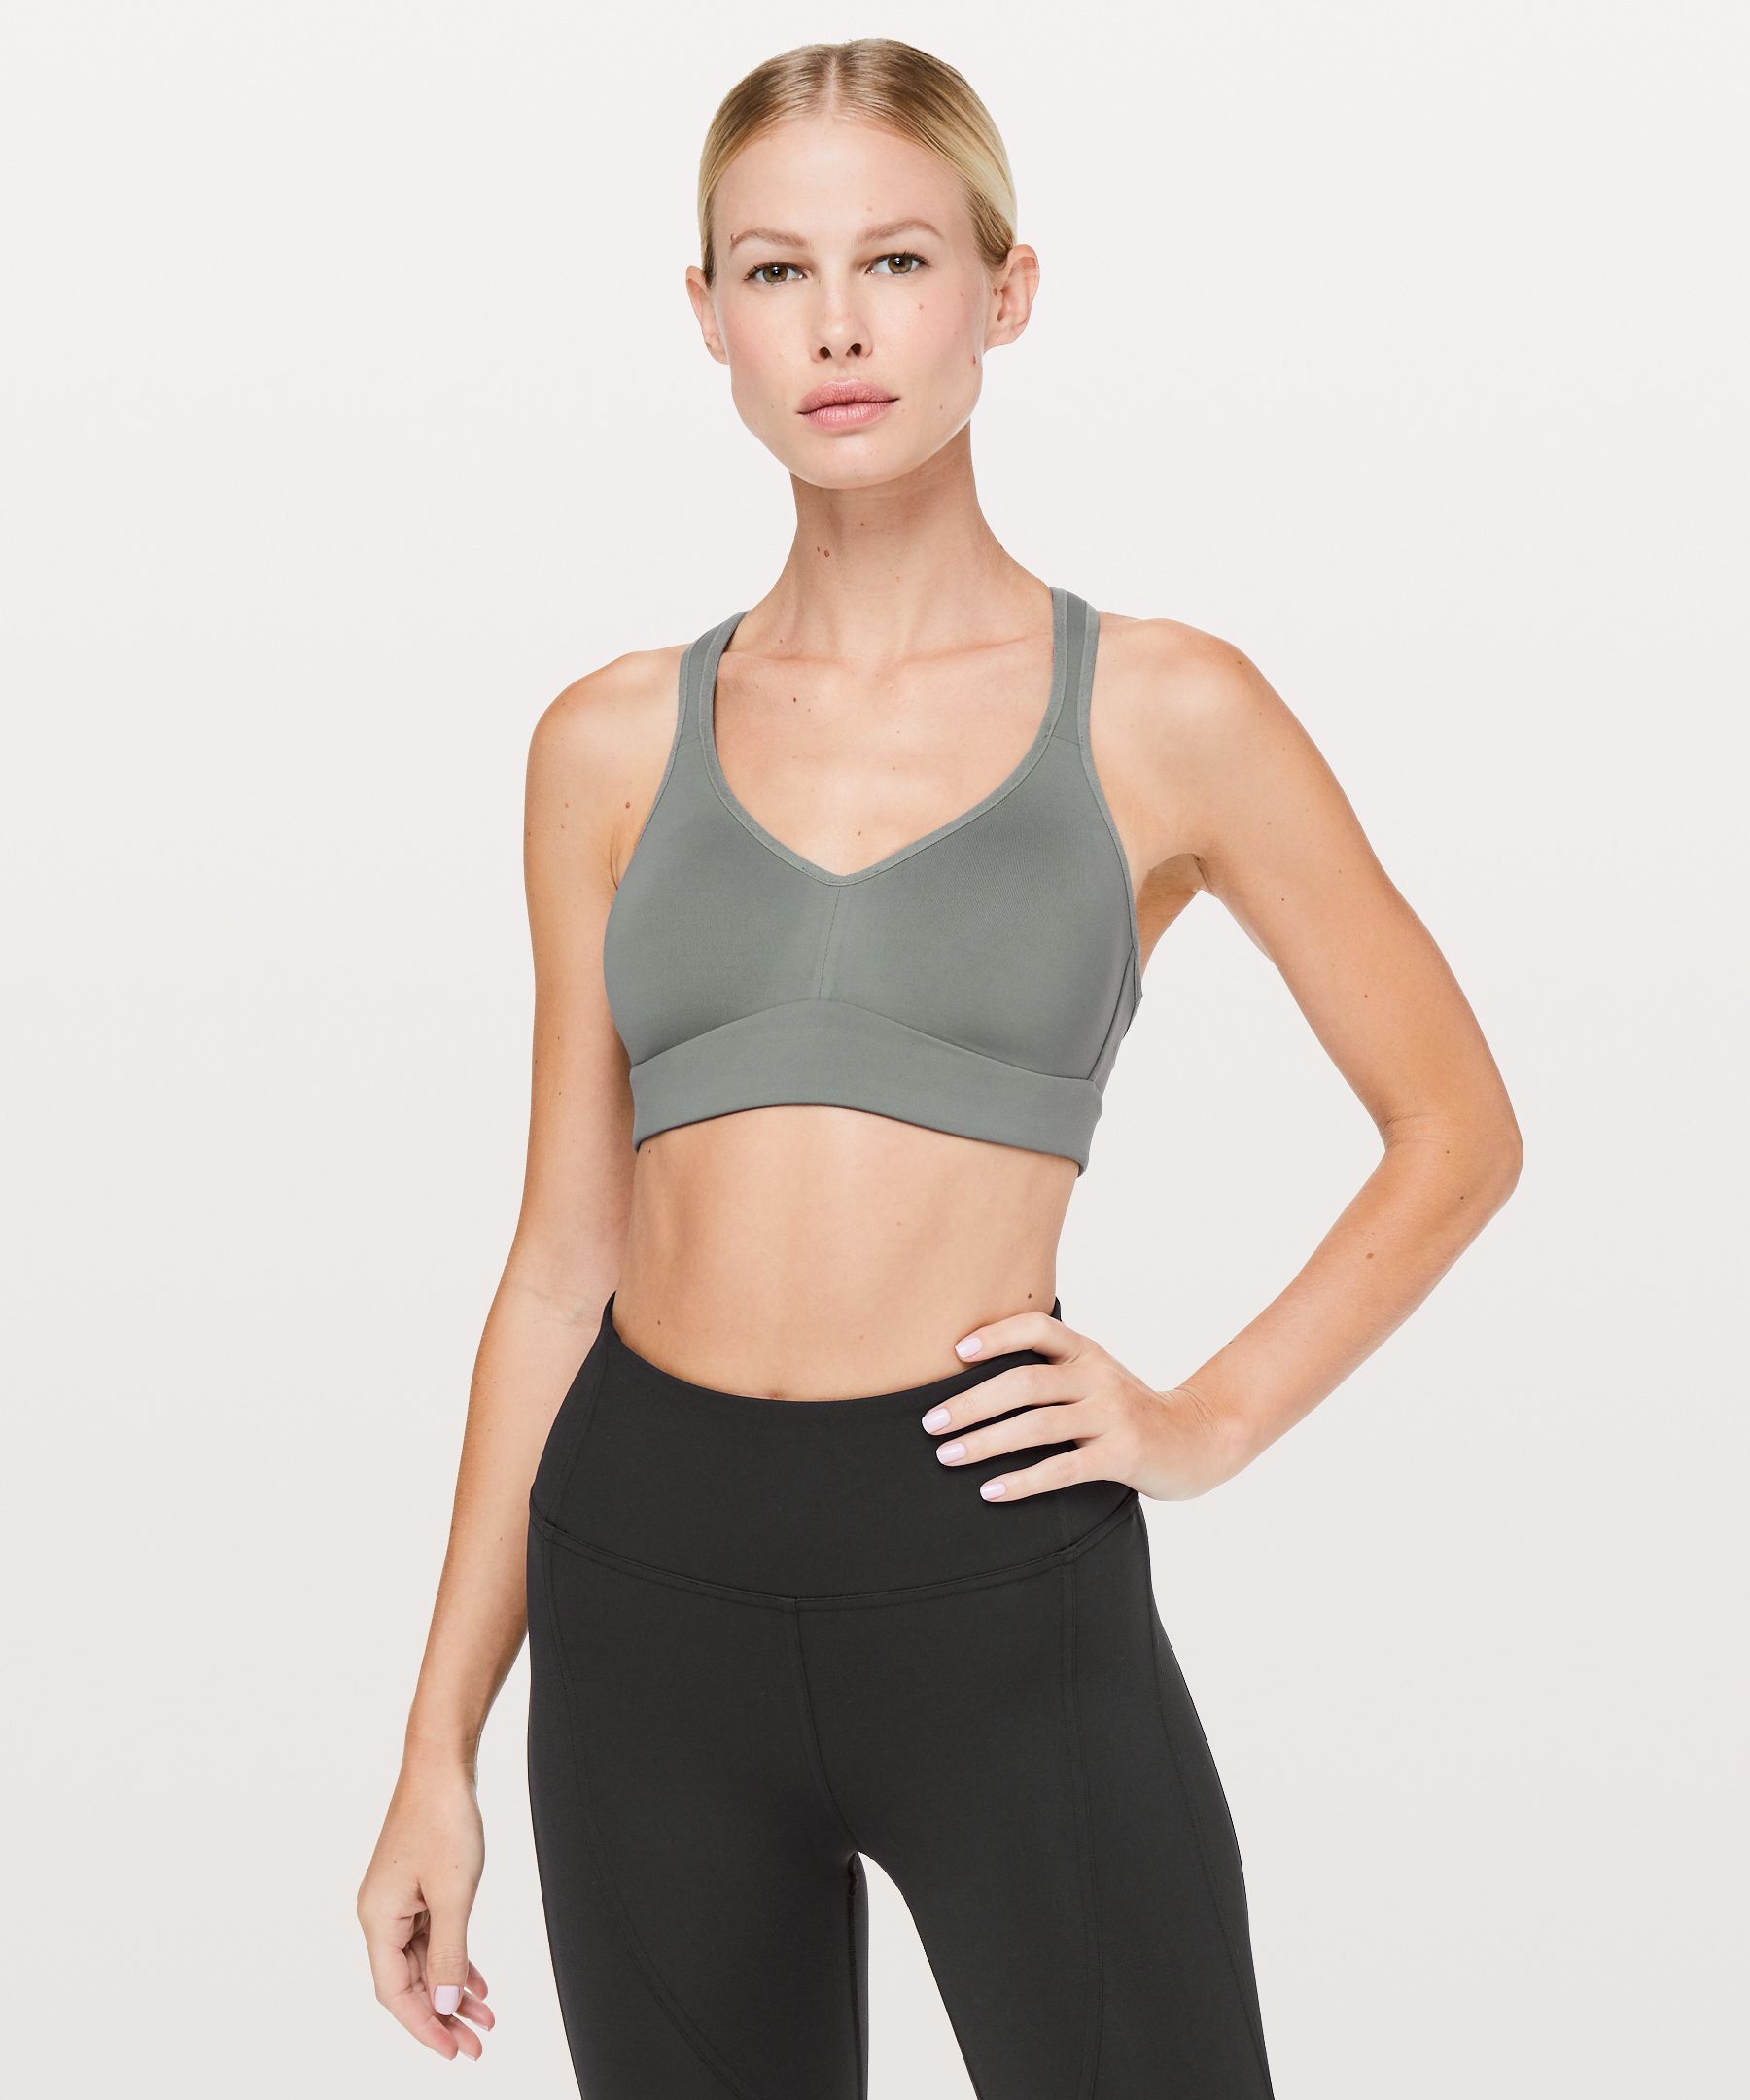 Lululemon Speed Up Bra C/D Cup - High Support and Natural Shape